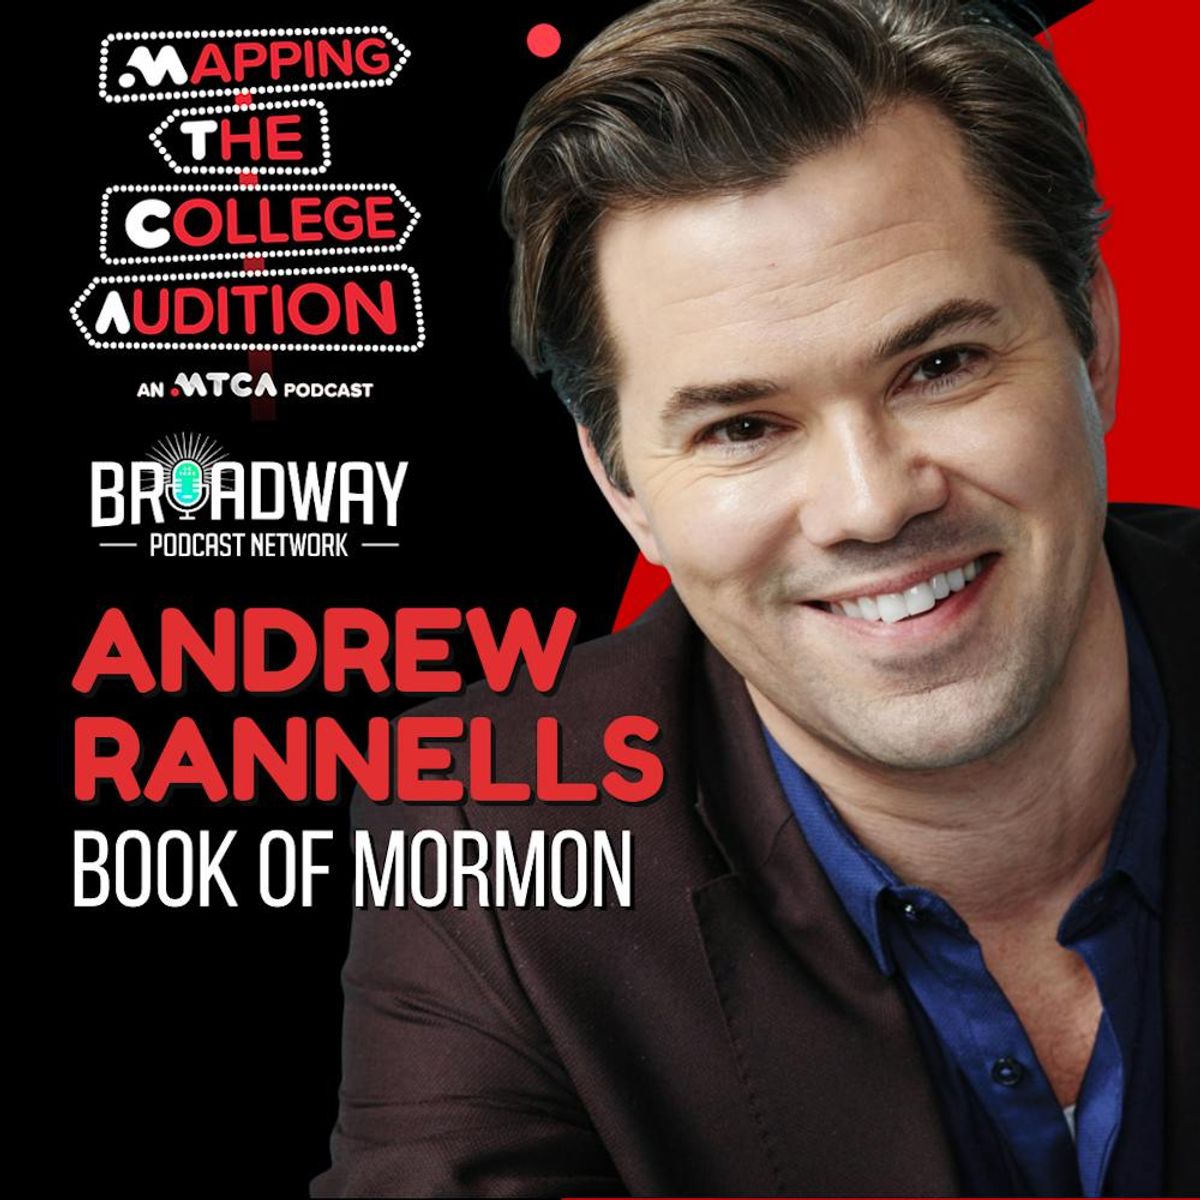 Broadway Podcast Network – Andrew Rannells (Broadway Book of Mormon) on the nature of comedy